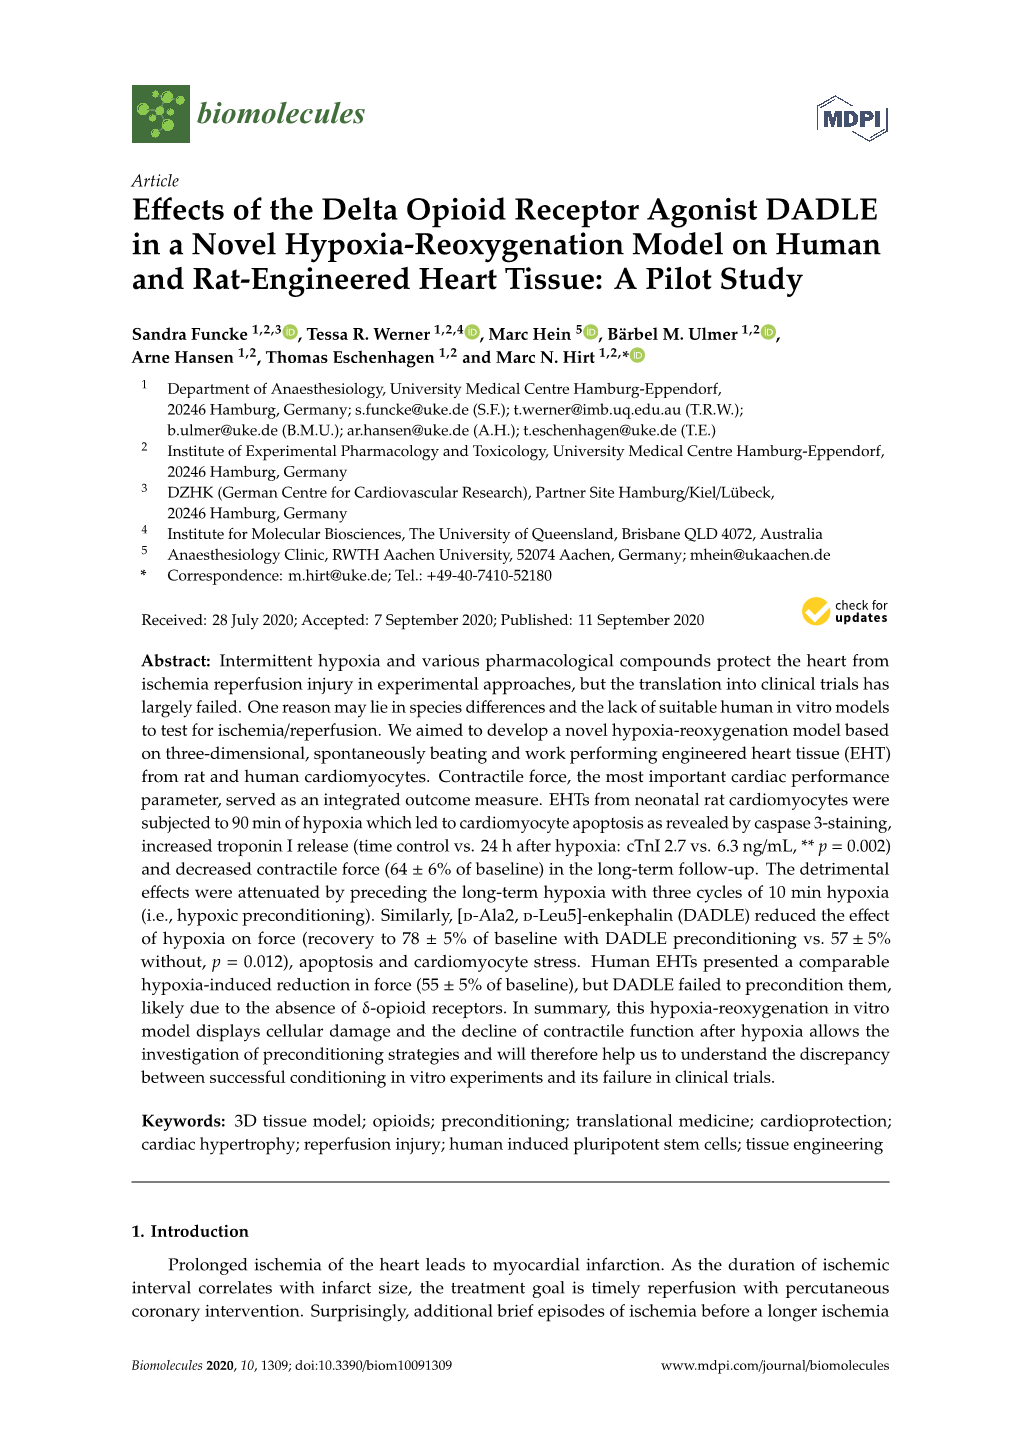 Effects of the Delta Opioid Receptor Agonist DADLE in a Novel Hypoxia